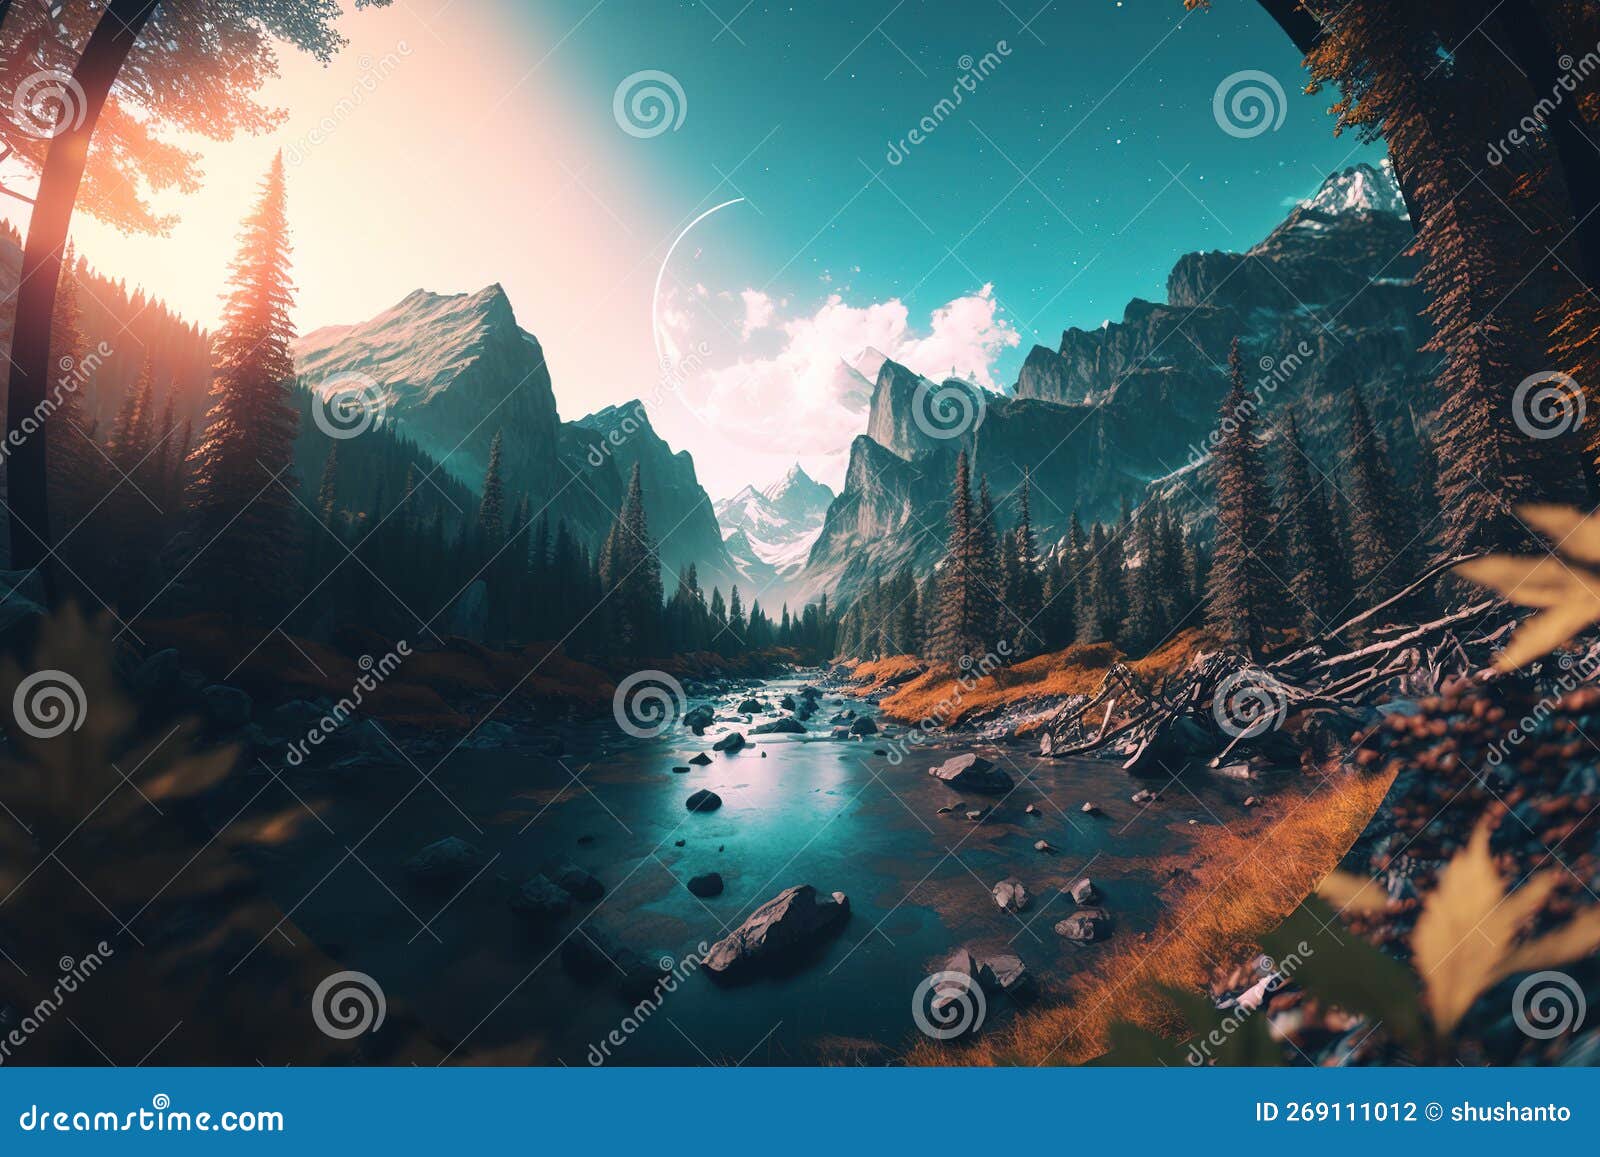 Nature with Trees, Mountains and a Flowing River, the Galaxies in the ...